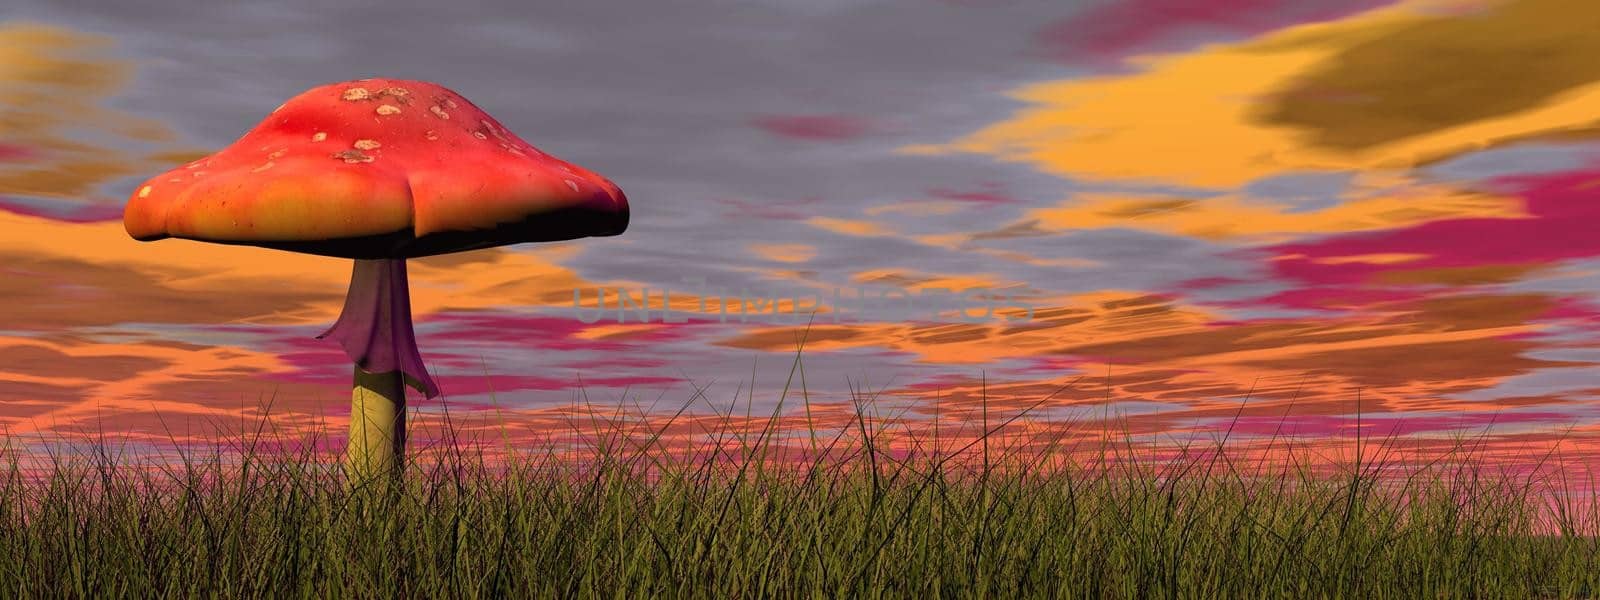 One fairy red mushroom in the green grass by colorful cloudy sunset